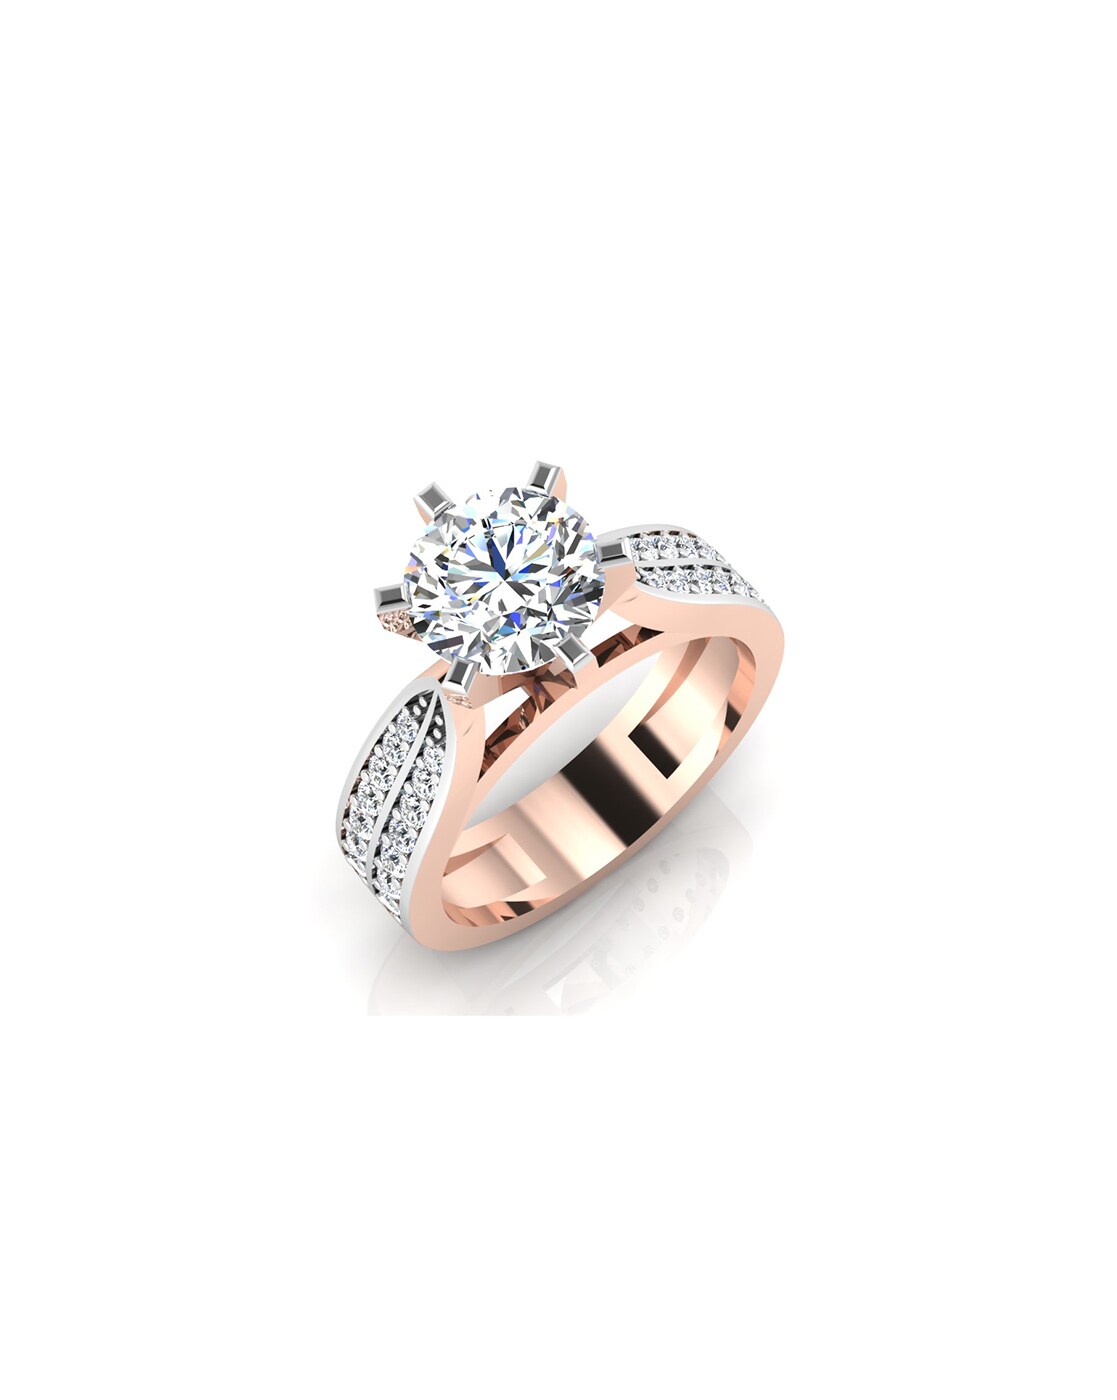 18K Rose Gold Knot Ring Designer Dainty Jewelry For Women, S925 Silver With  Interwoven Knots Perfect Valentines Day Gift From Alukonsi, $13.63 |  DHgate.Com